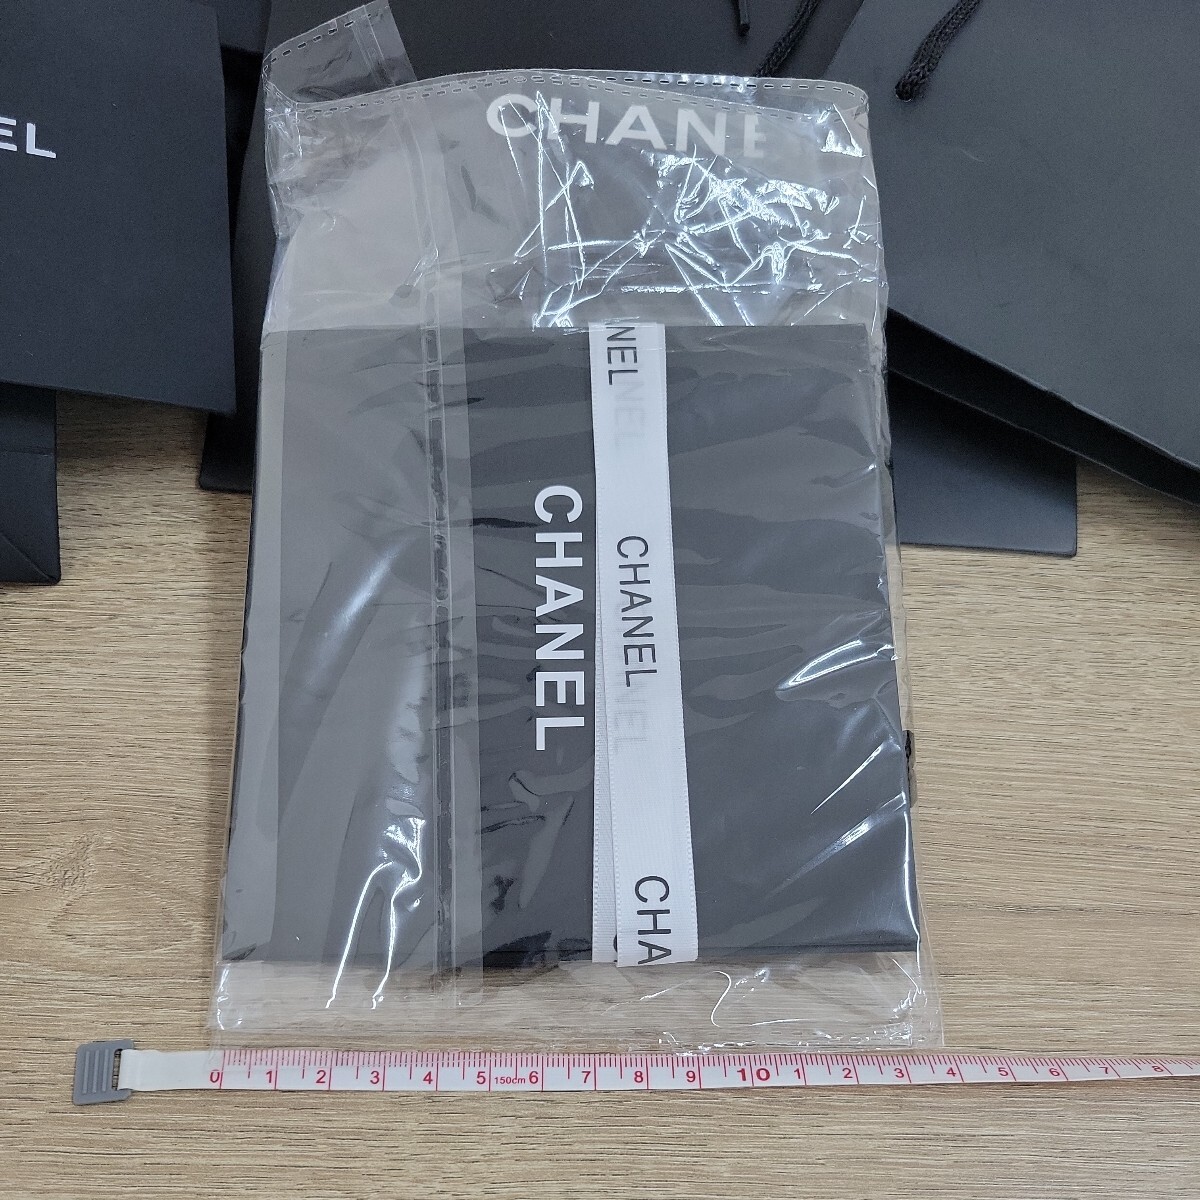  Chanel paper bag sack CHANEL small articles for storage bag accessory set summarize 